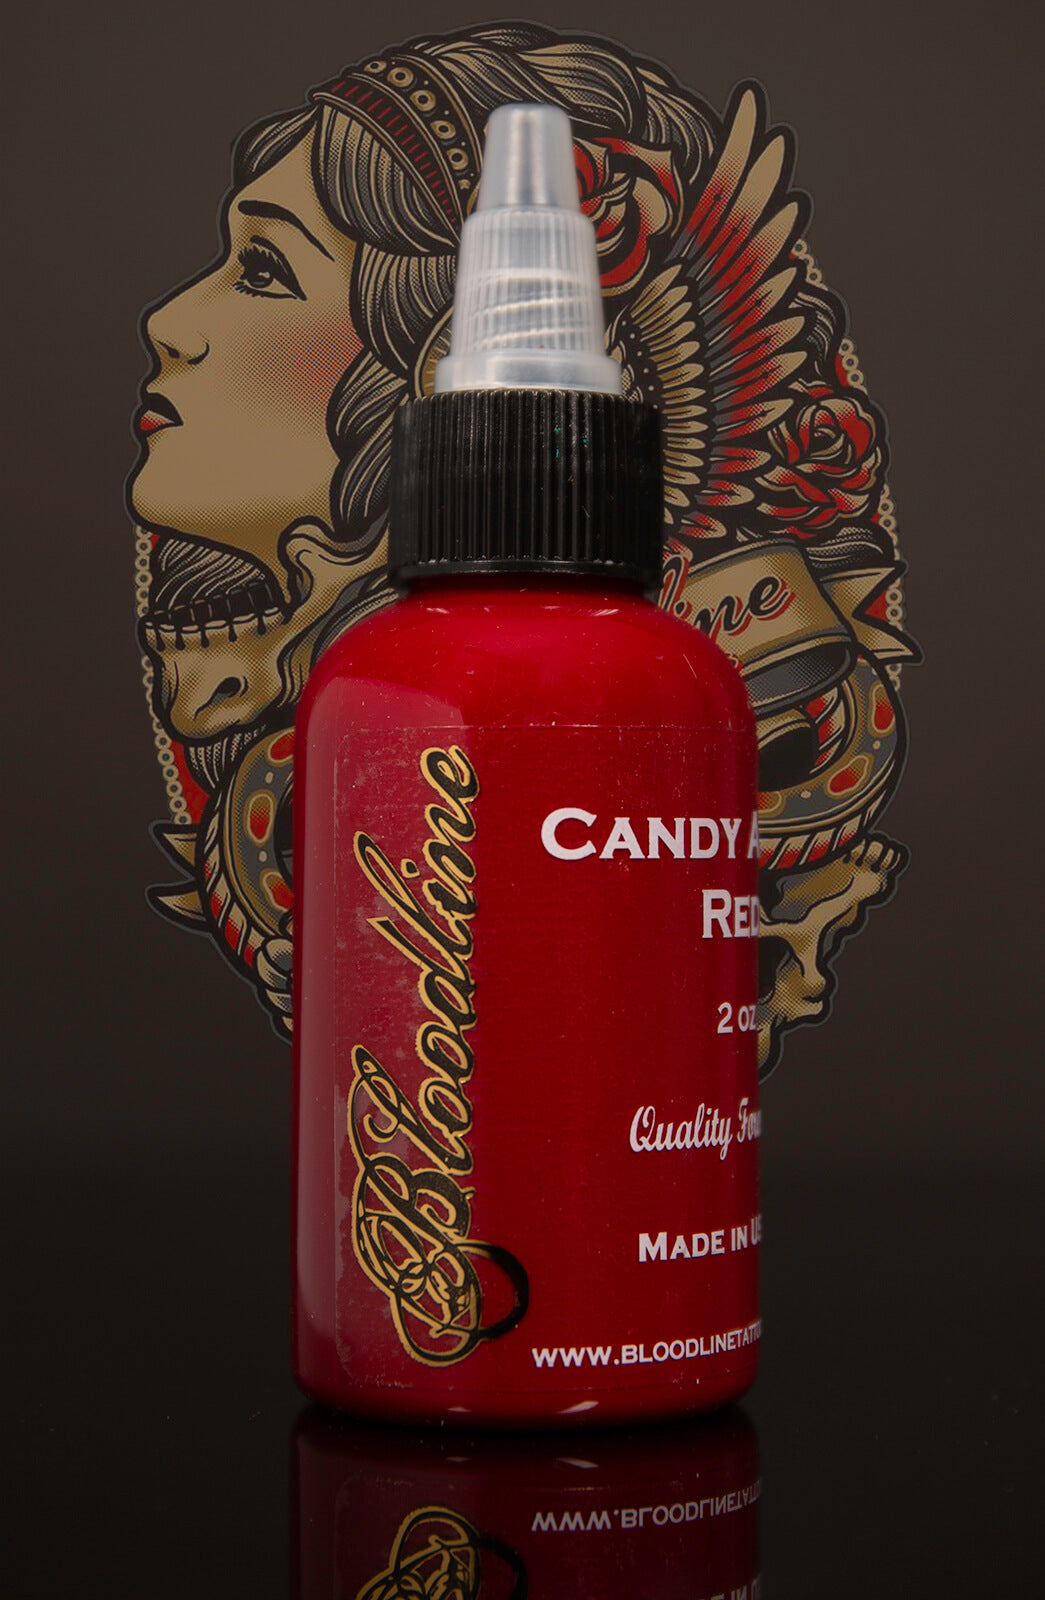 Candy Apple Red – Bloodline Tattoo Ink Direct